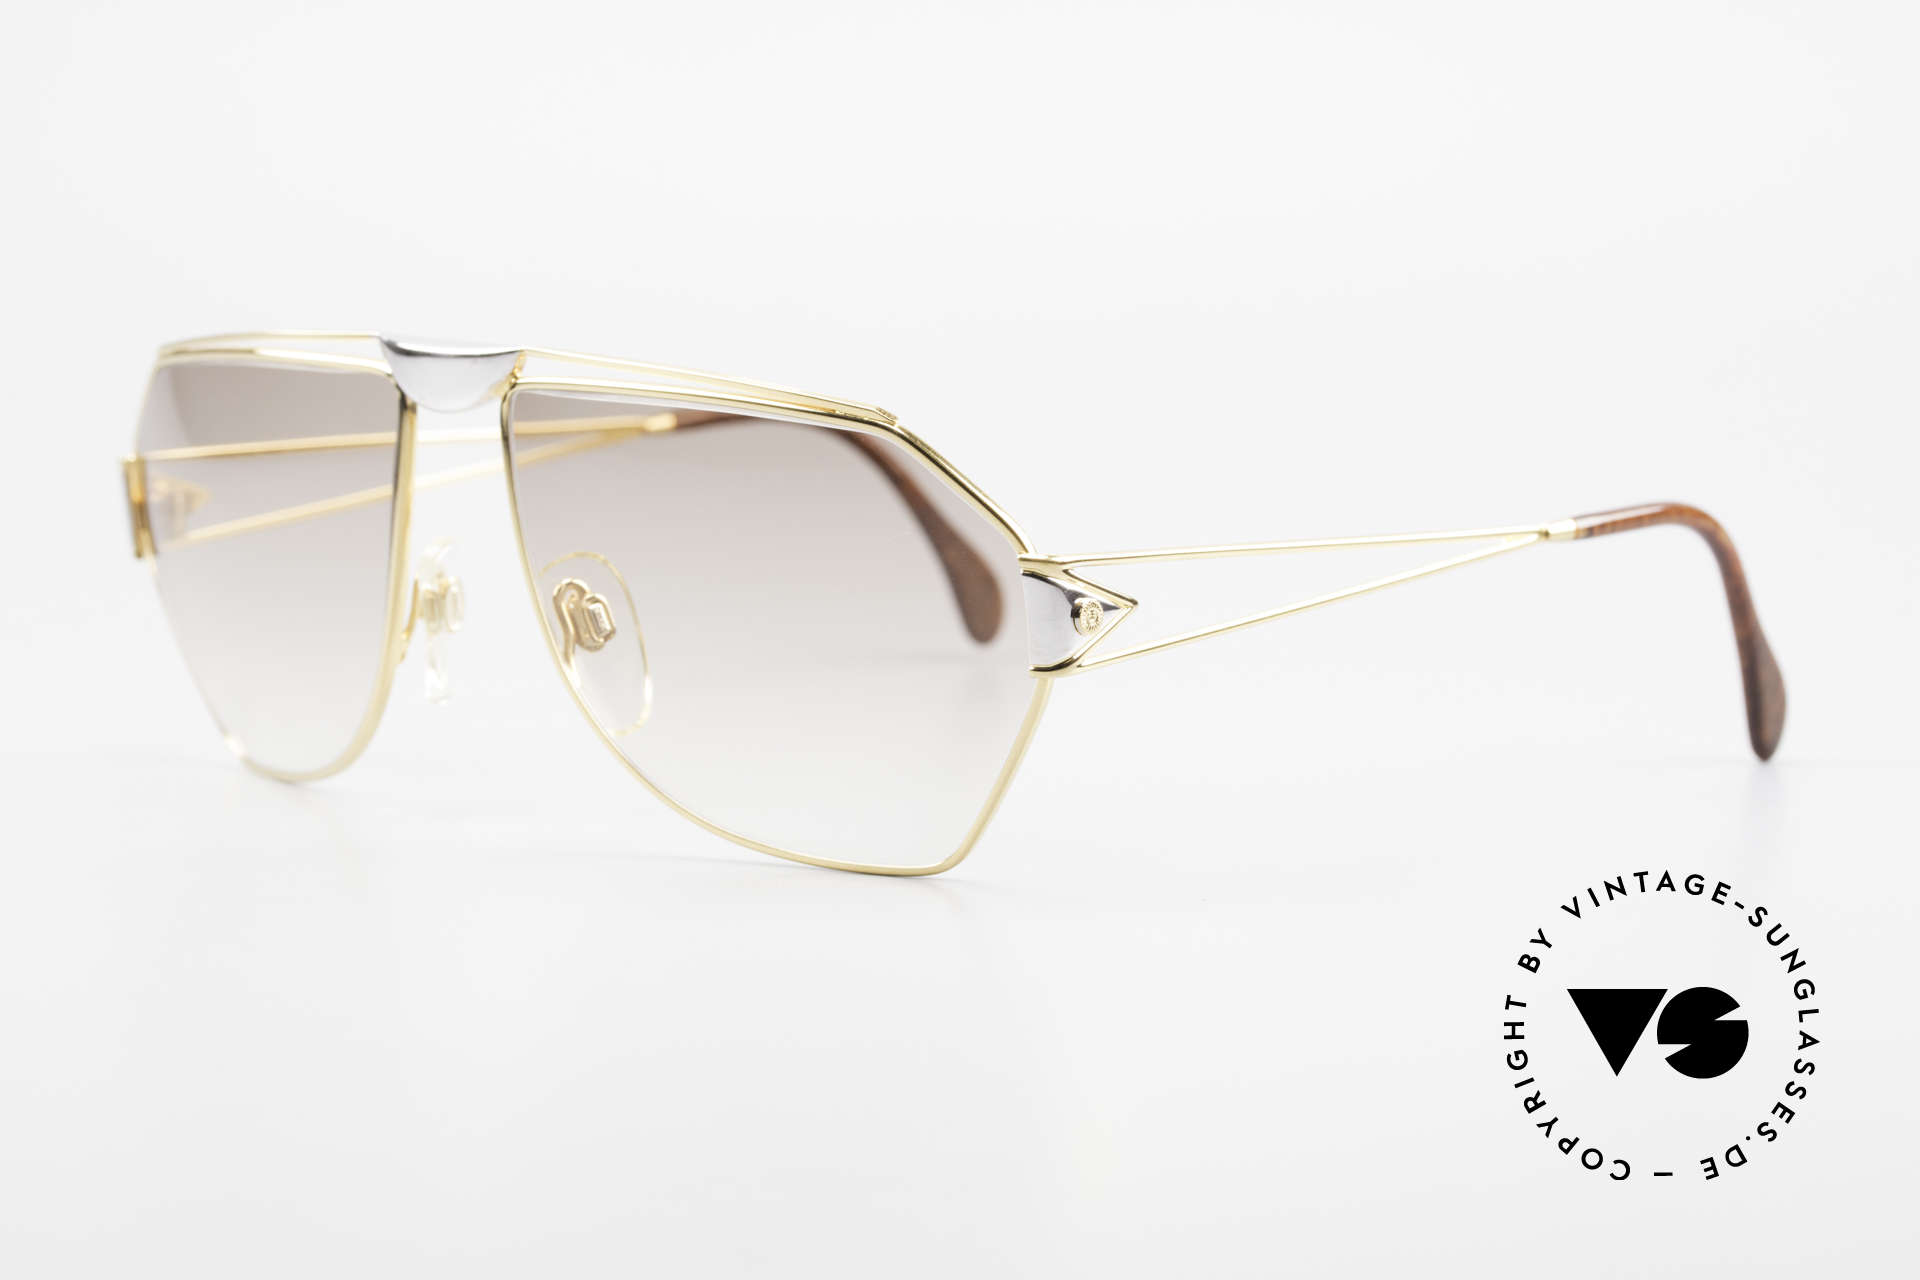 St. Moritz 403 Luxury Jupiter Sunglasses 80s, 80's limited-lot production (every frame is numbered), Made for Men